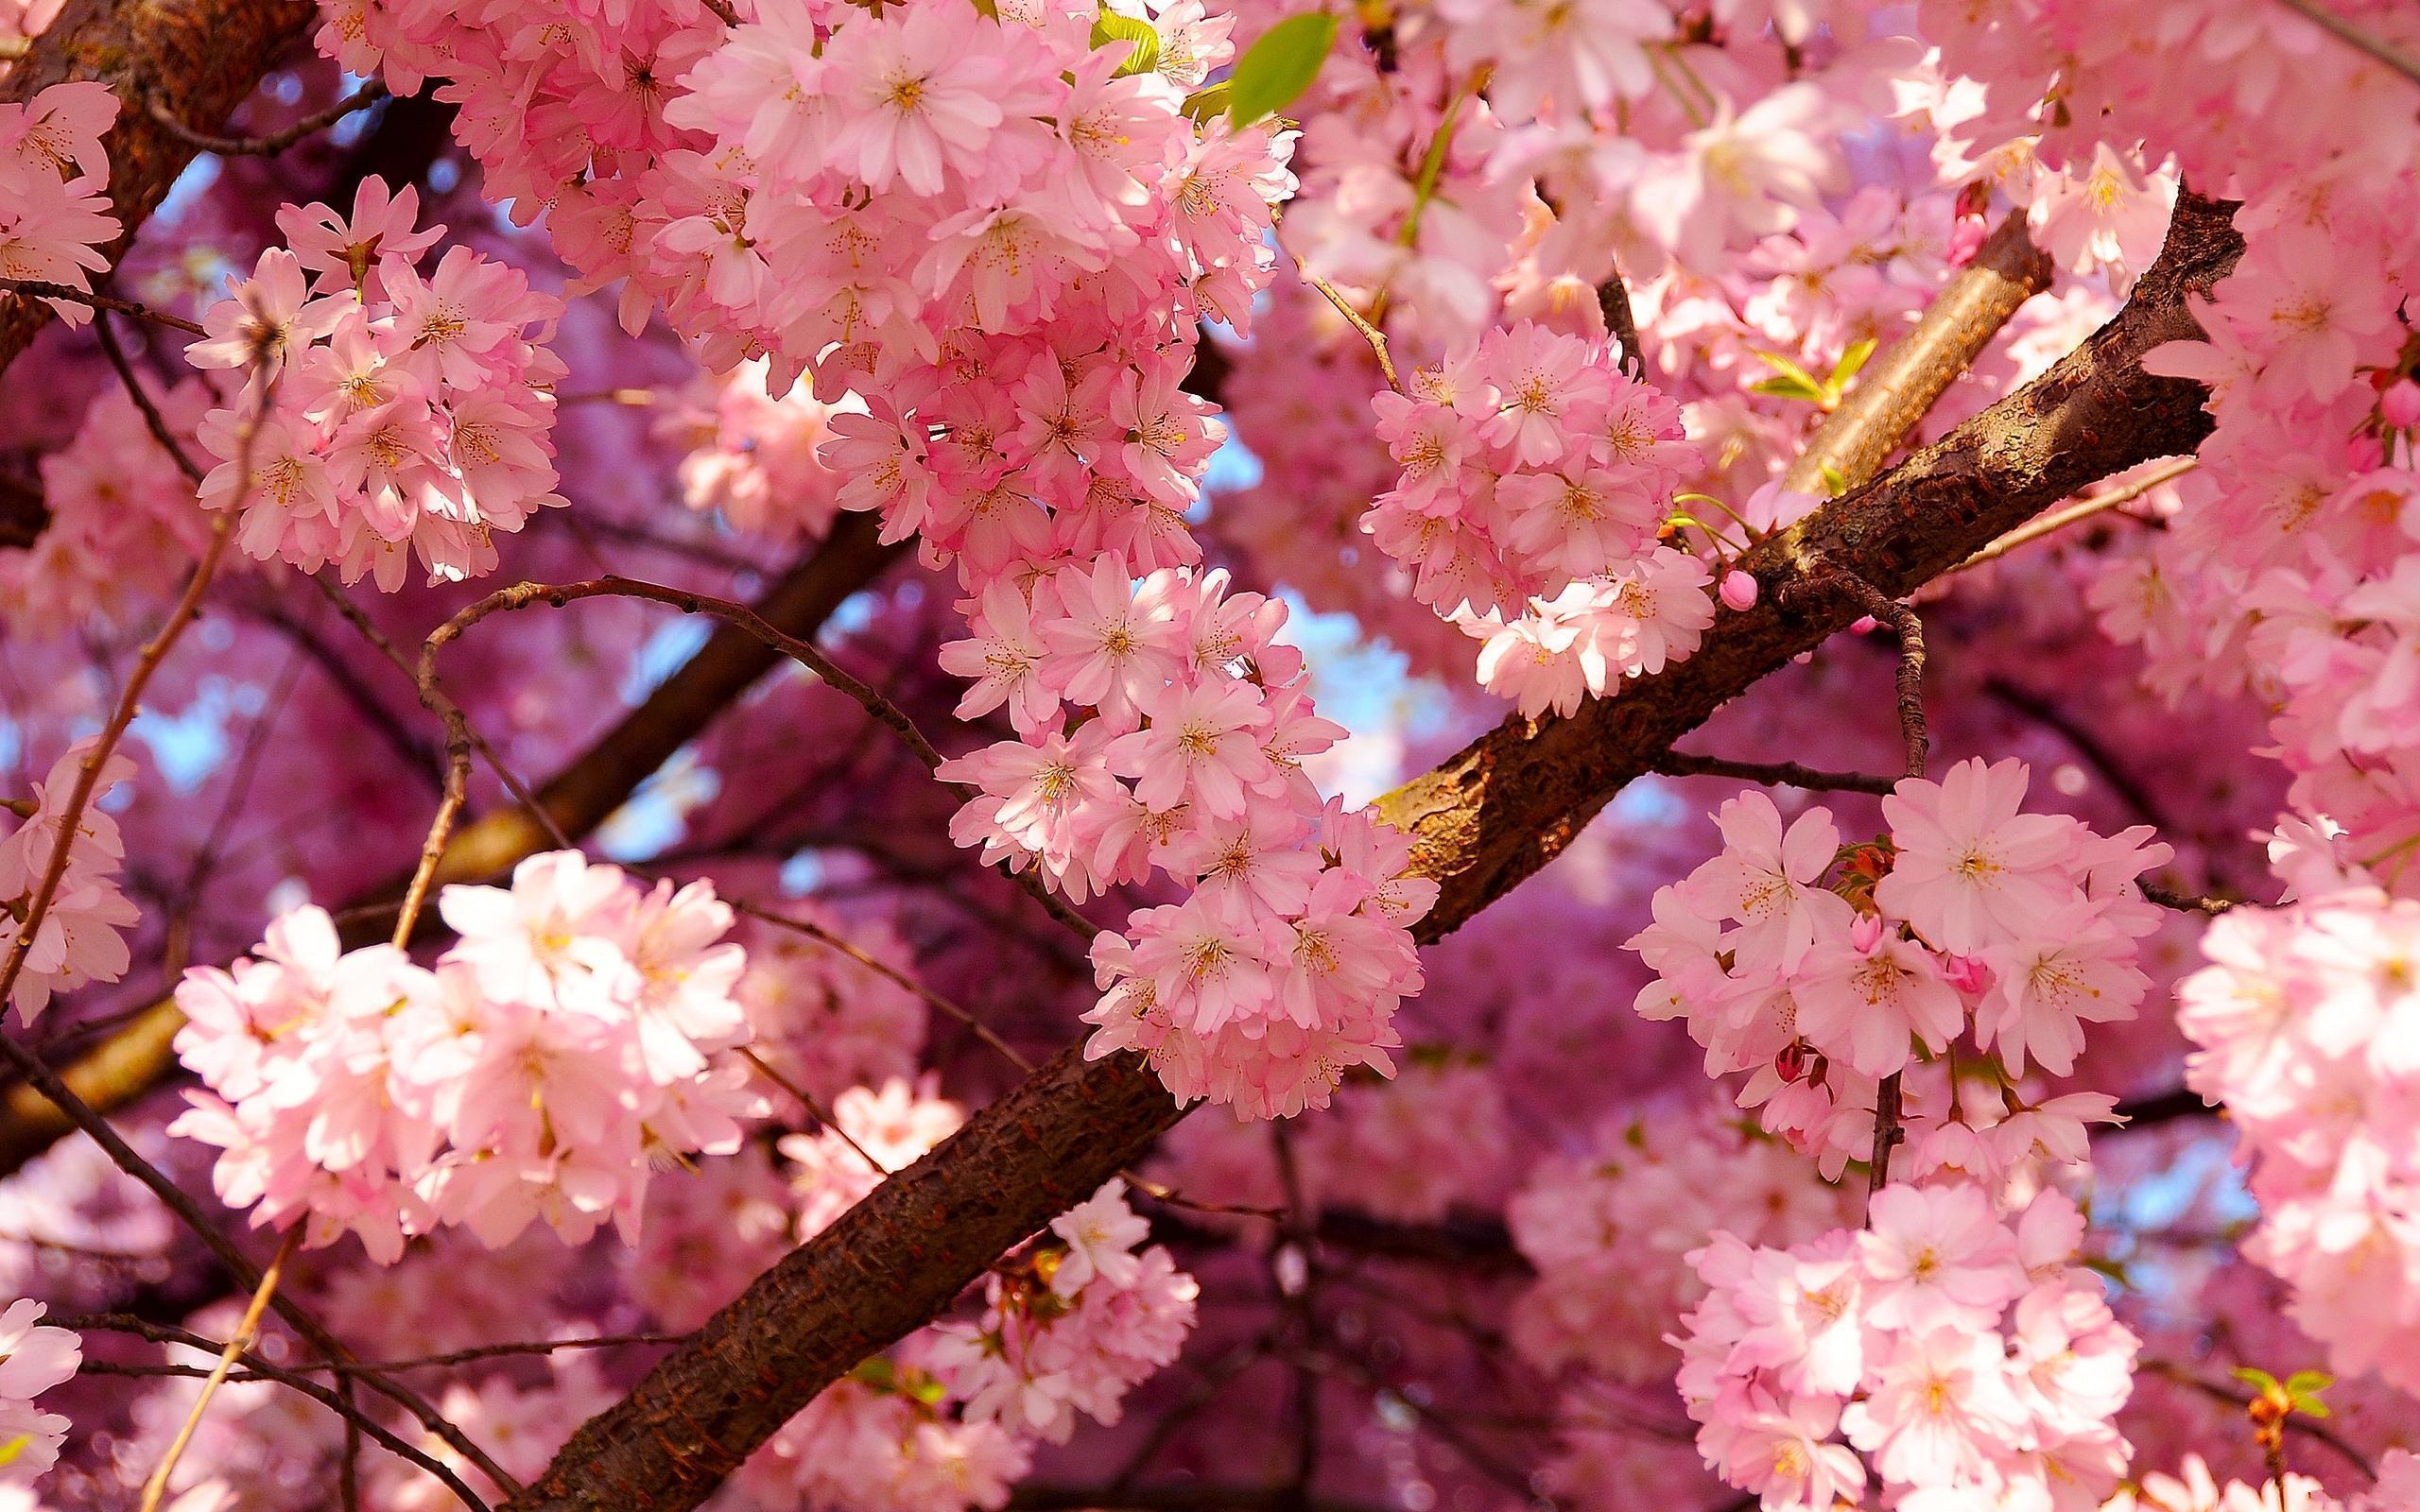 Cherry Blossom Wallpapers Wallpaper Cave